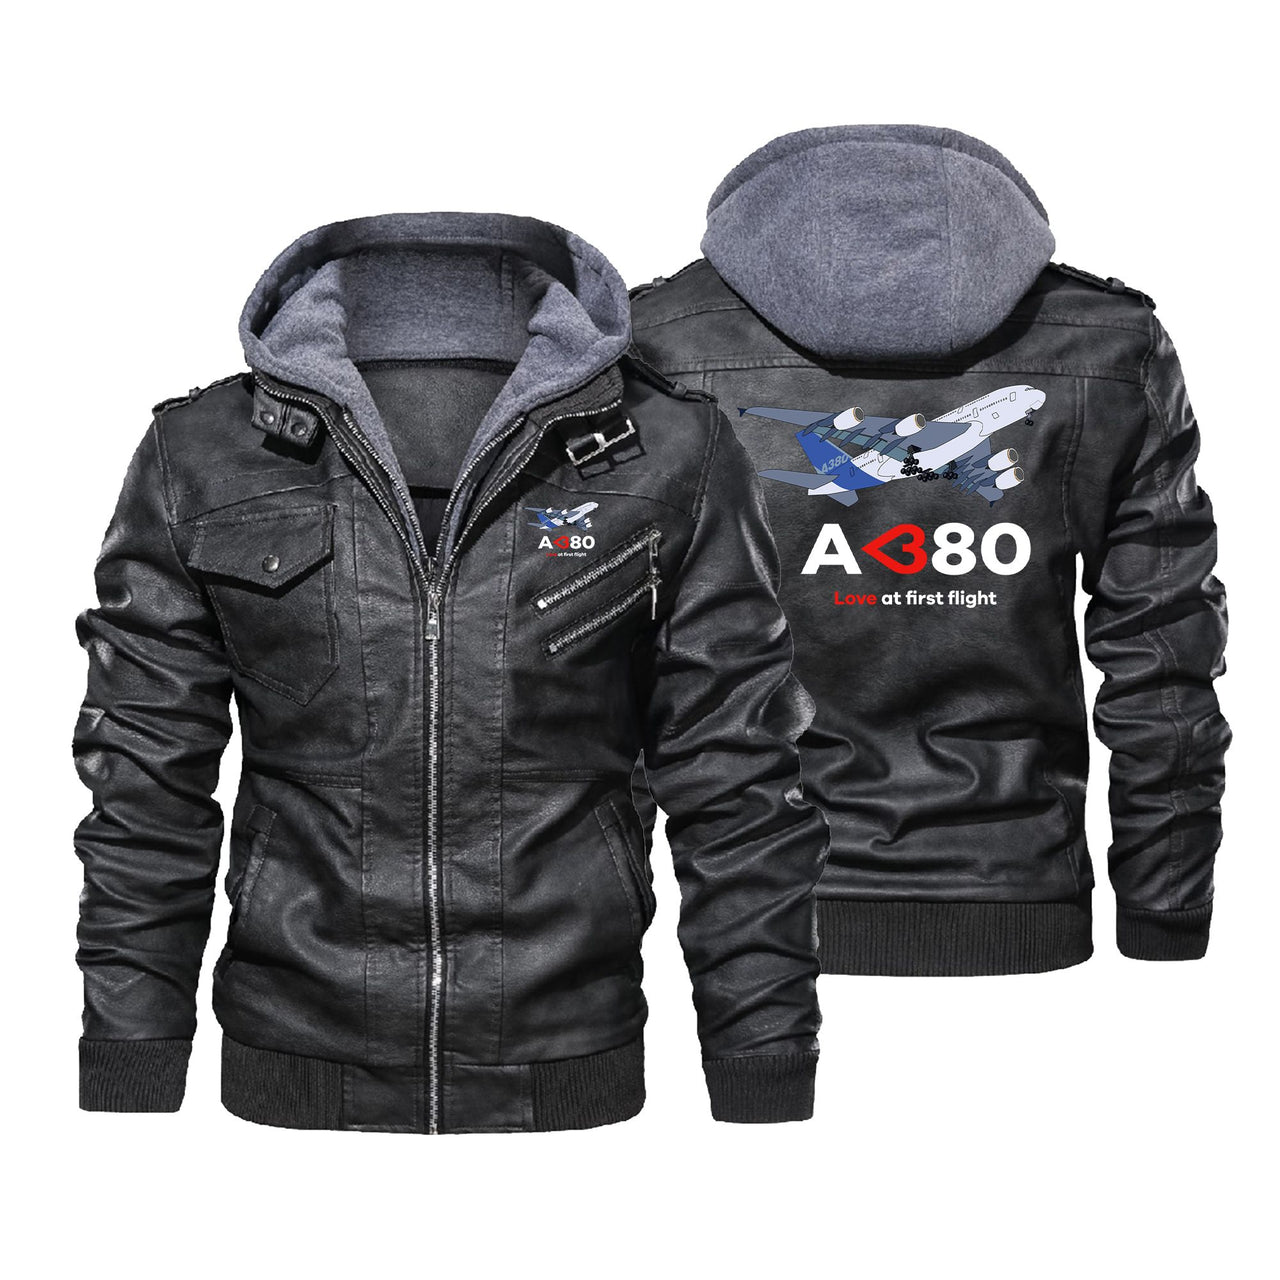 Airbus A380 Love at first flight Designed Hooded Leather Jackets